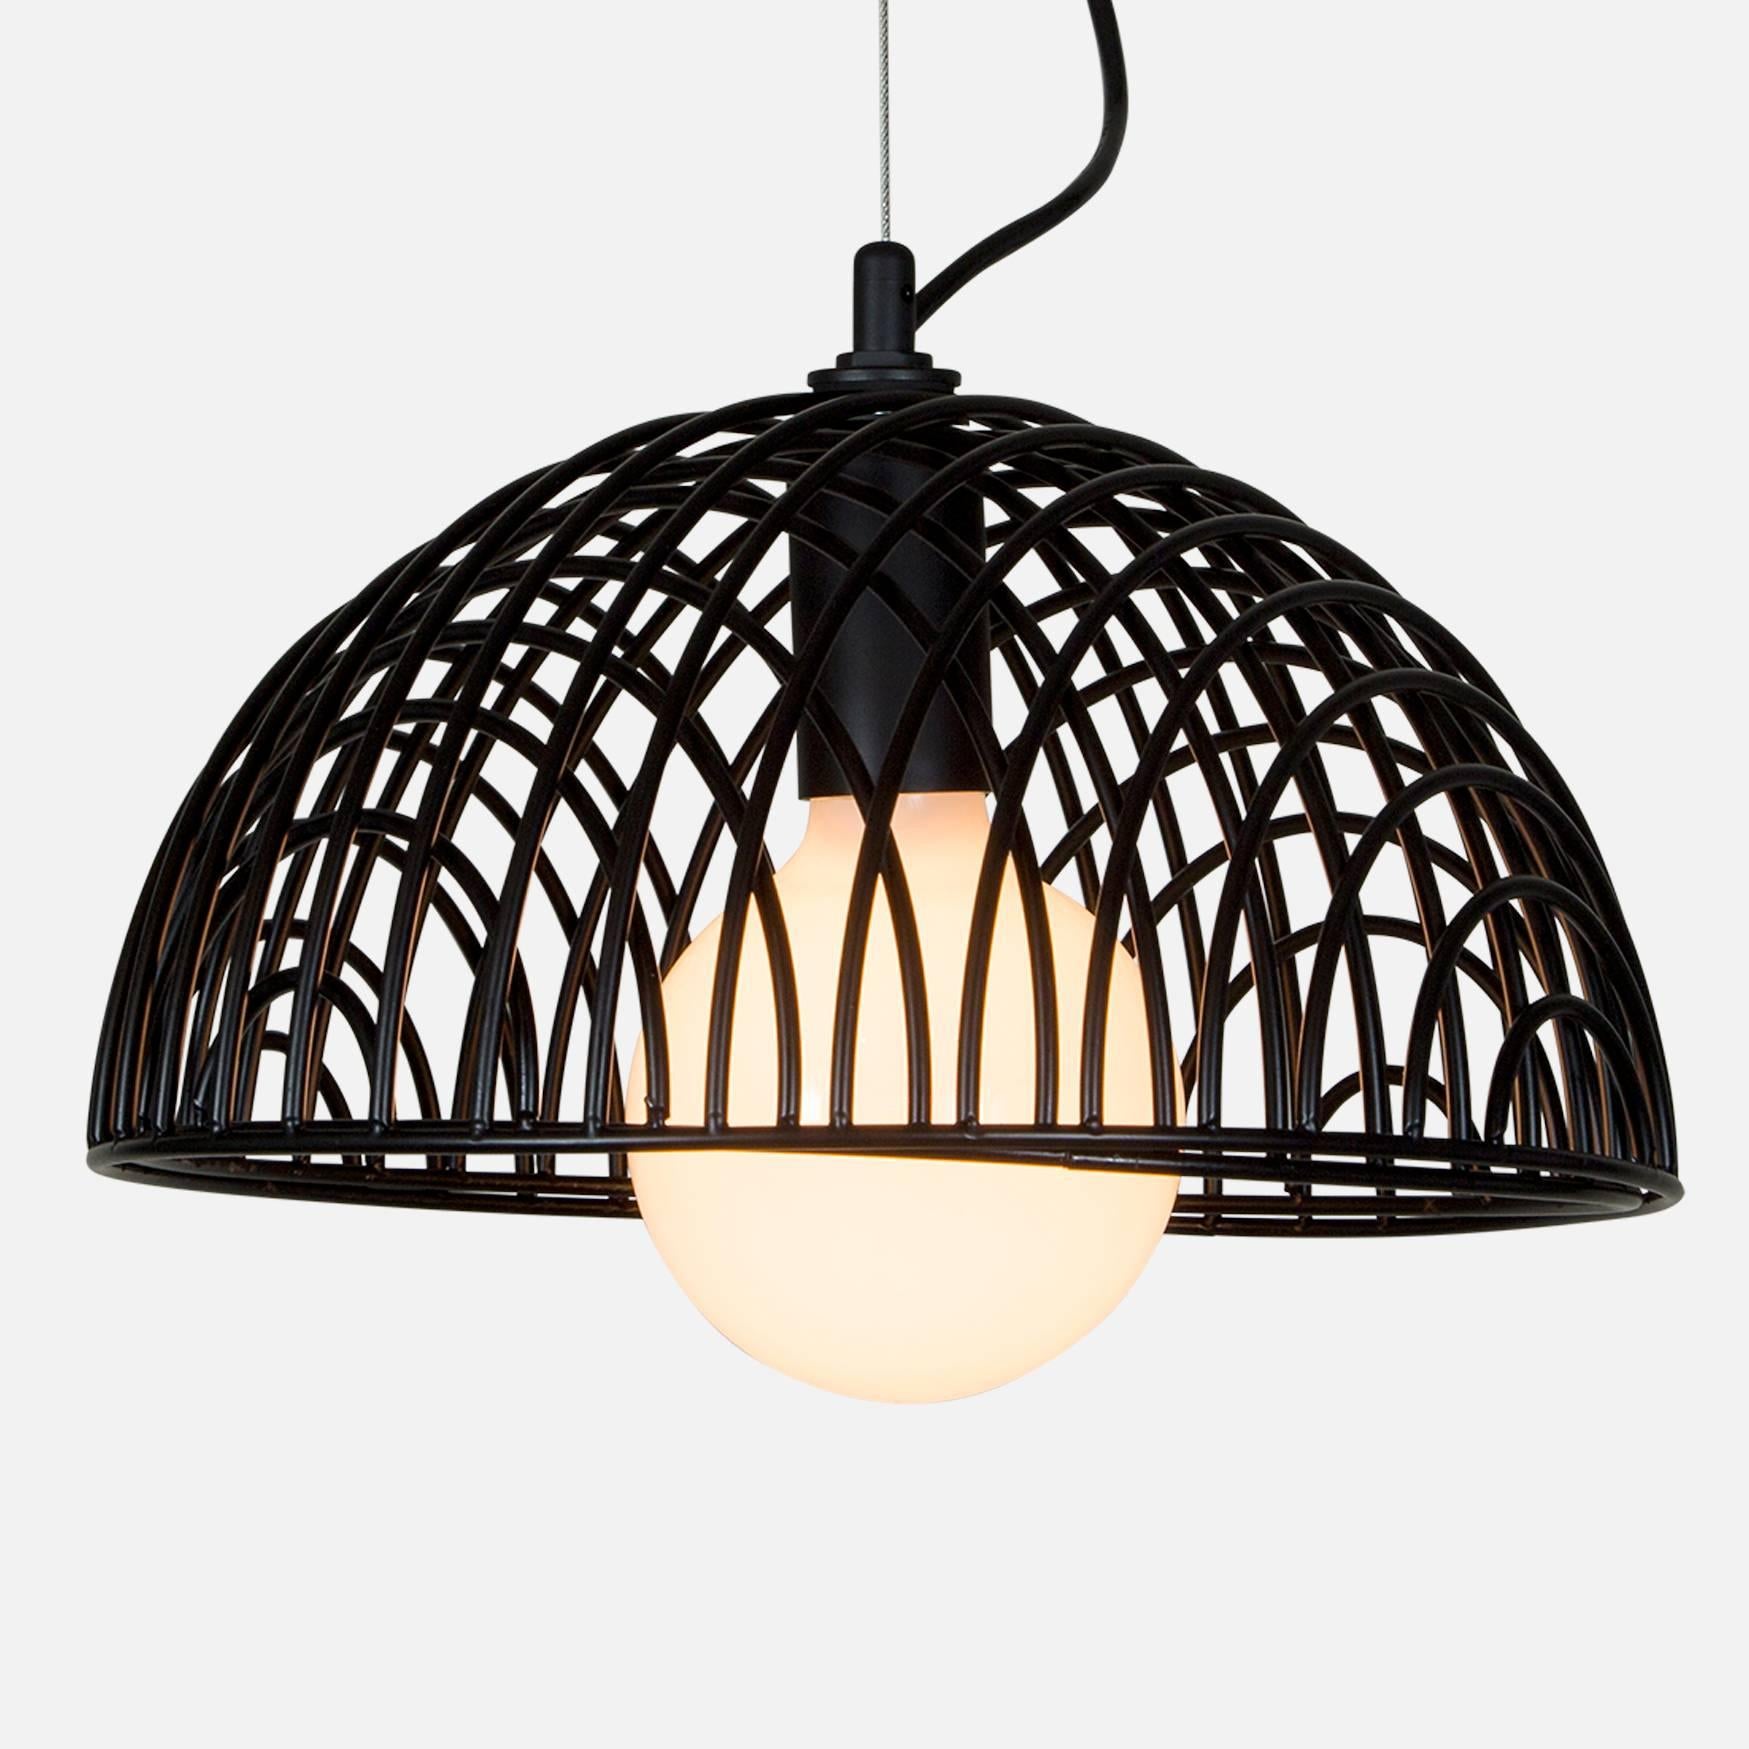 American Dana Pendant Light, Black from Souda, Made to Order For Sale